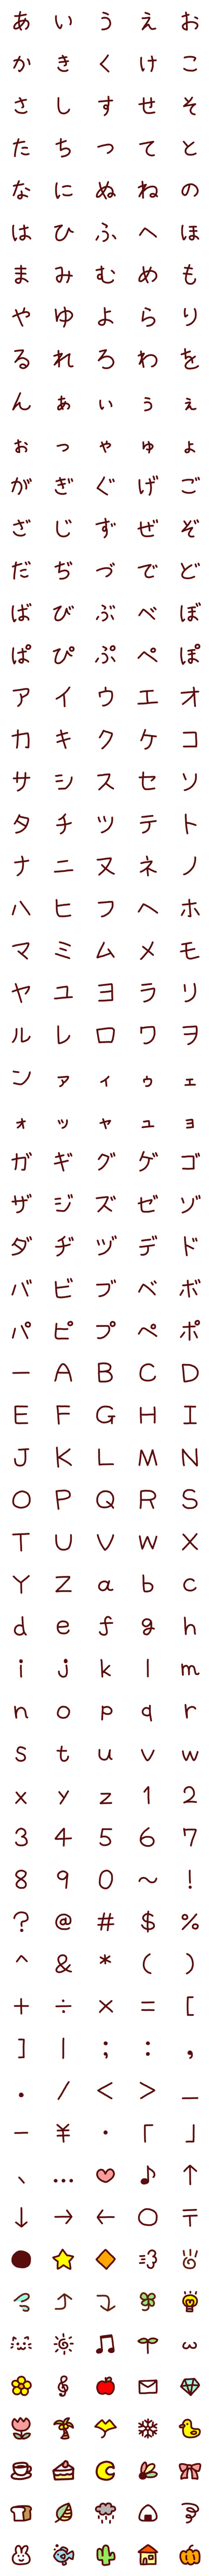 [LINE絵文字]【305字】こげ茶色の手書き文字＋絵文字の画像一覧